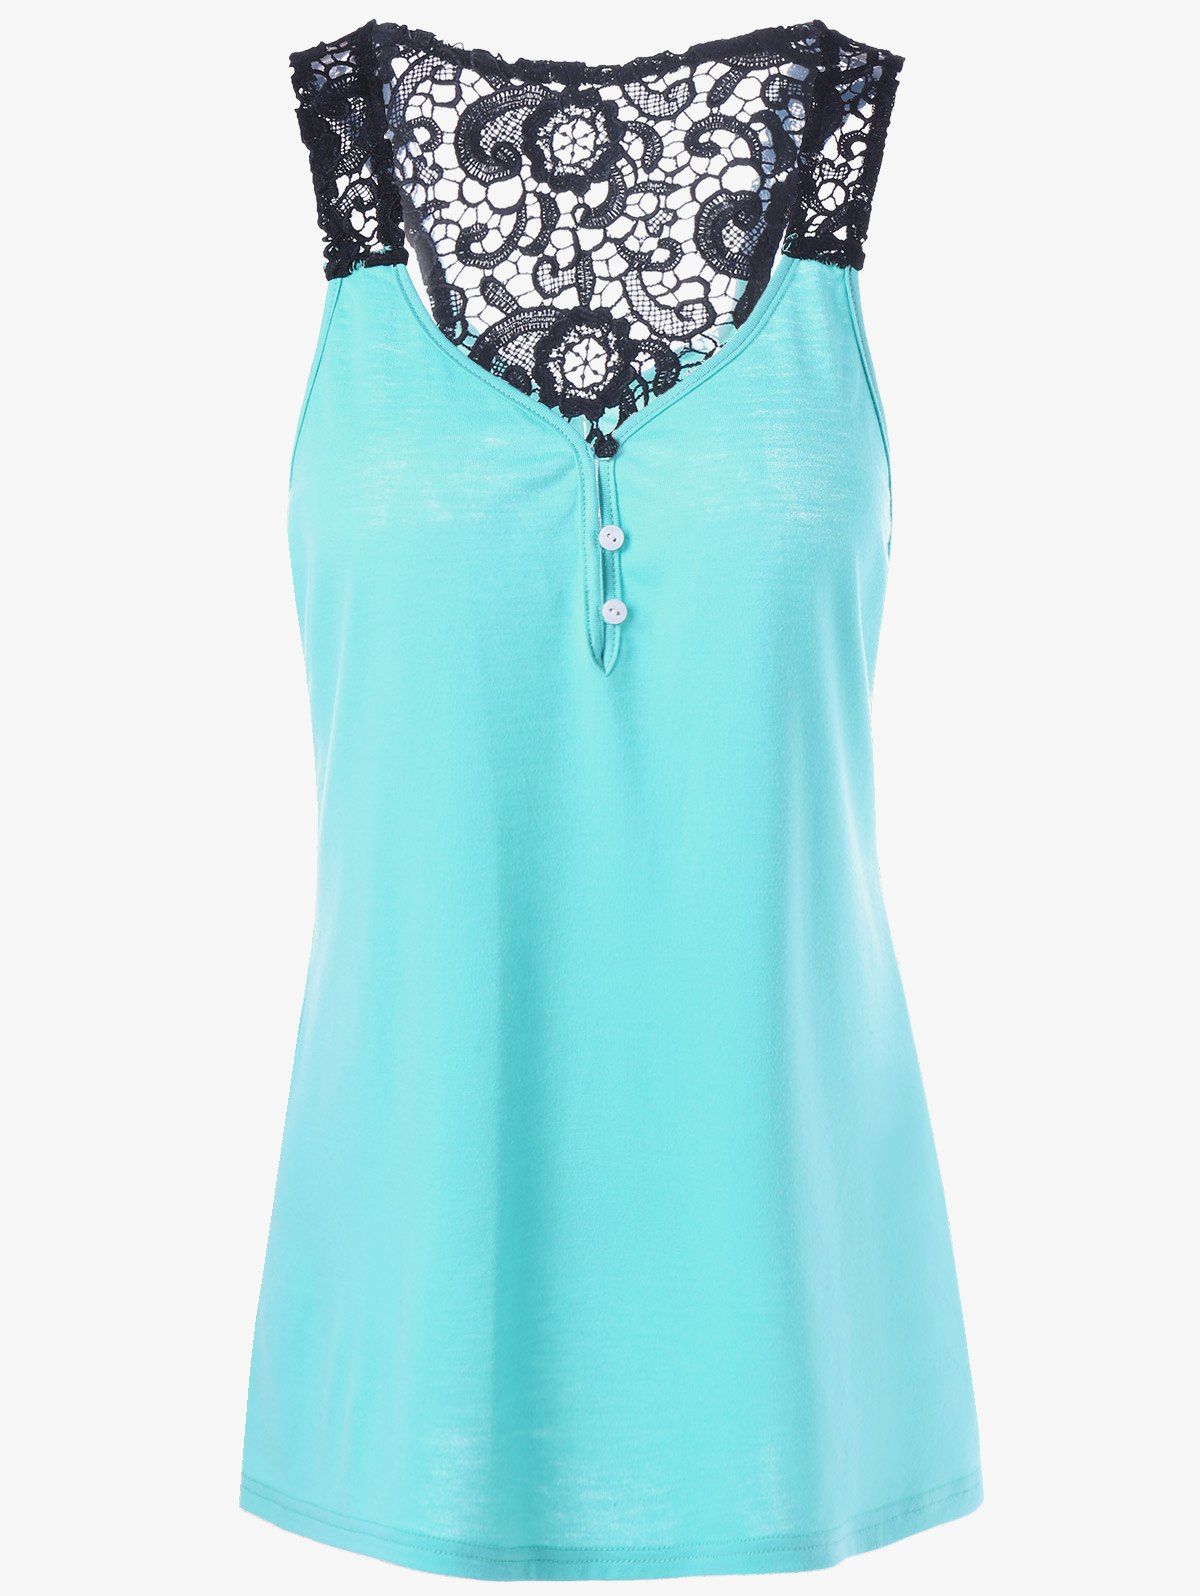 [41% OFF] 2021 Button Lace Hollow Out Racerback Tank Top In LAKE BLUE ...